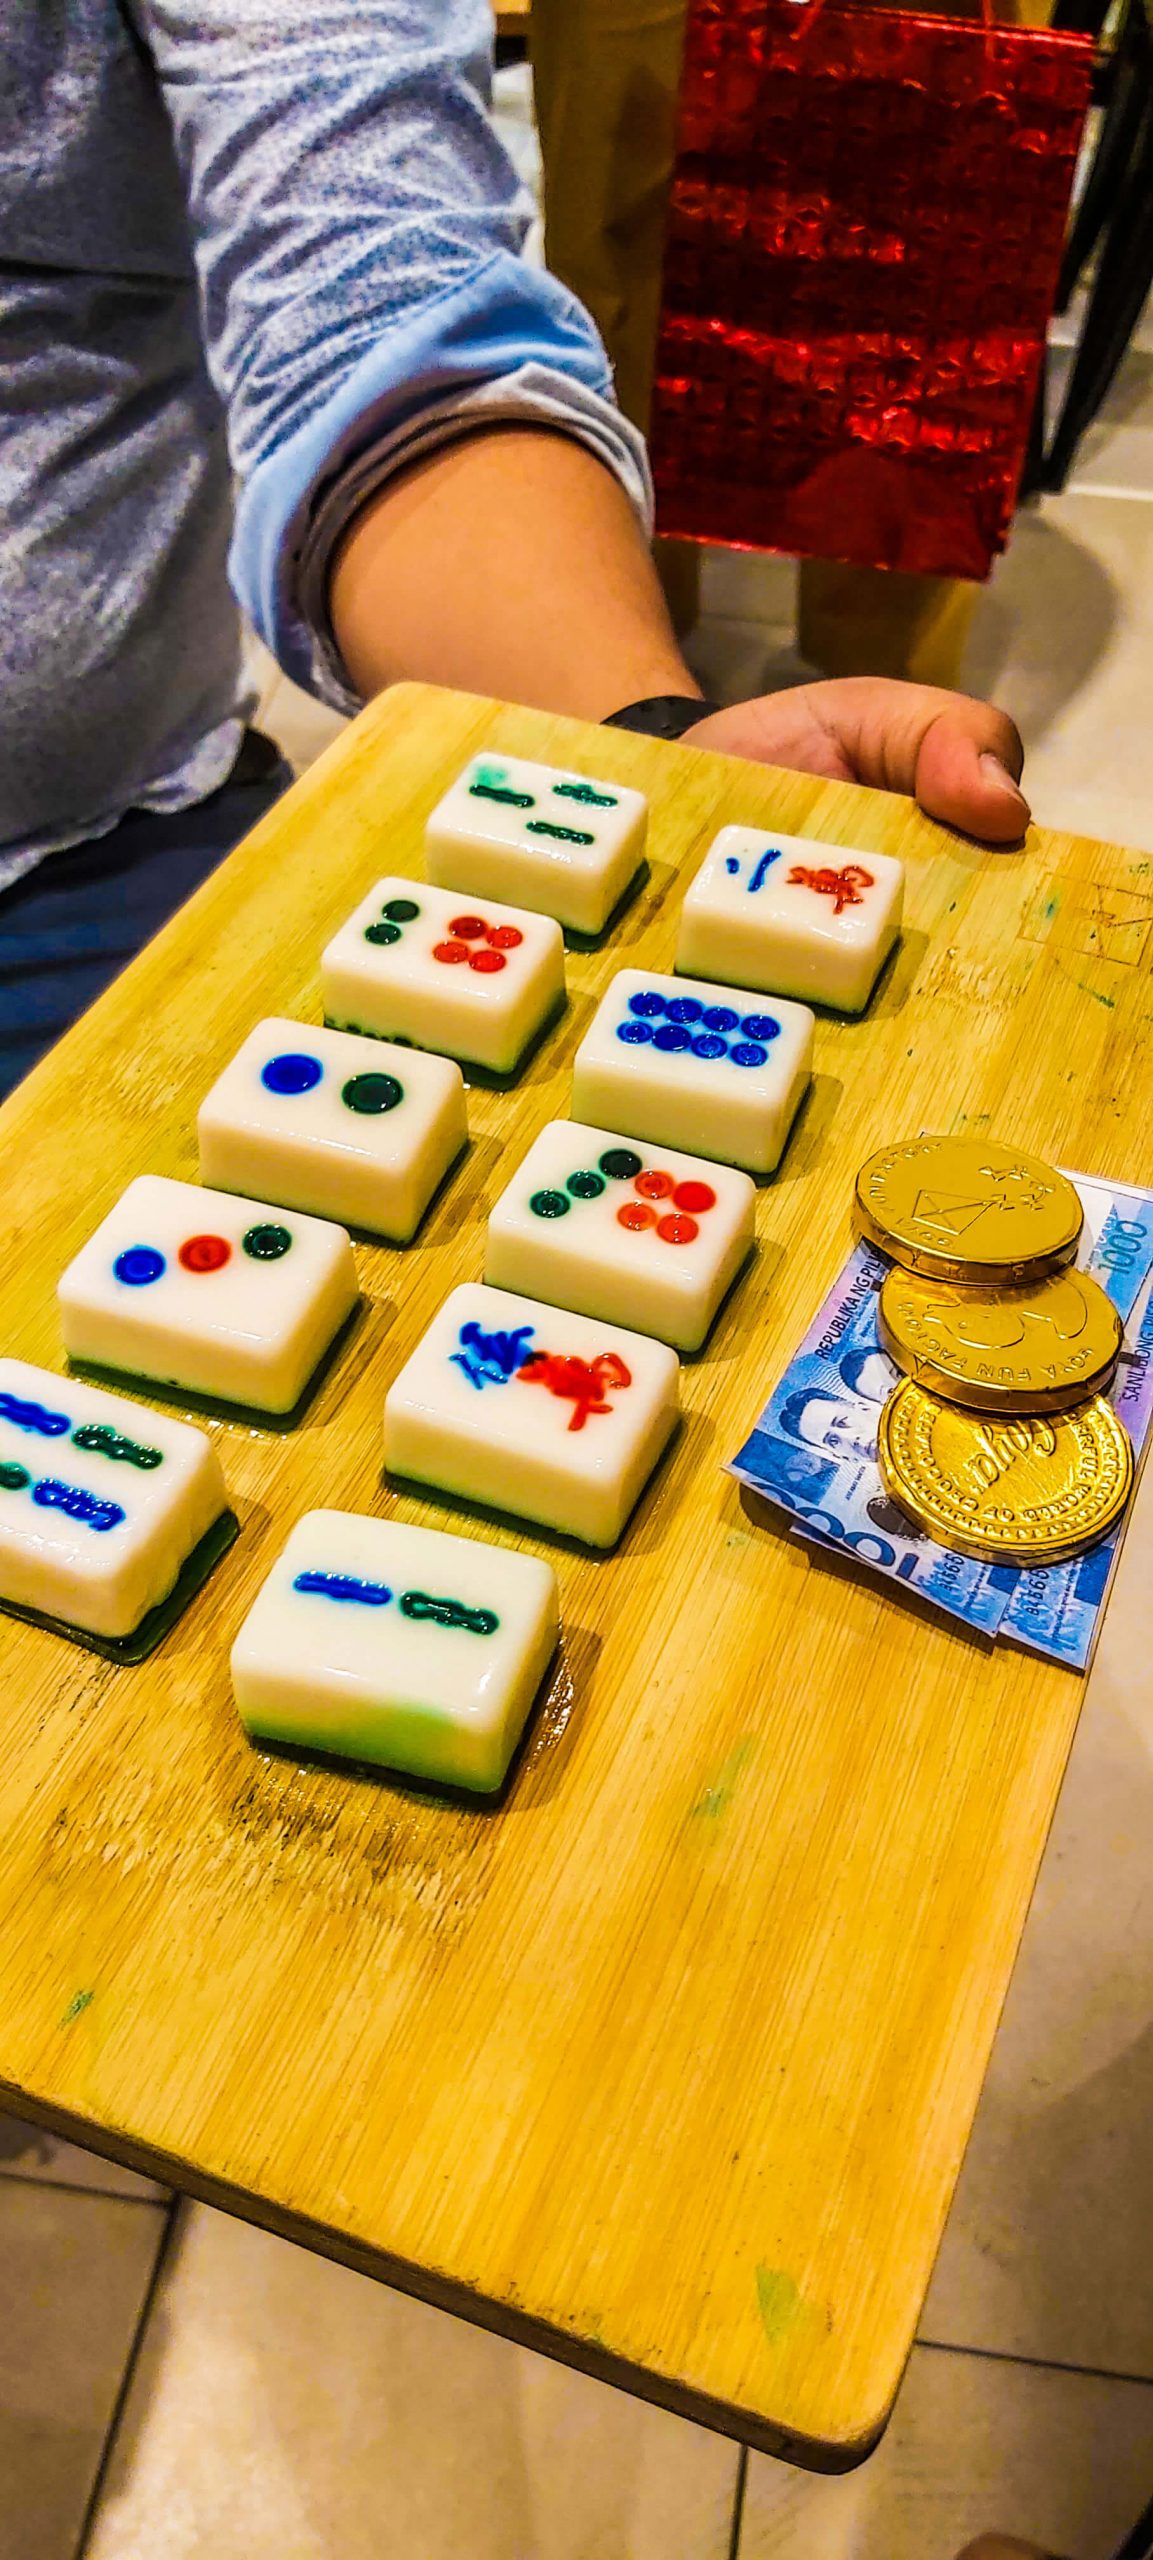 DESSERT. These mahjong tiles are actually sweet treats.